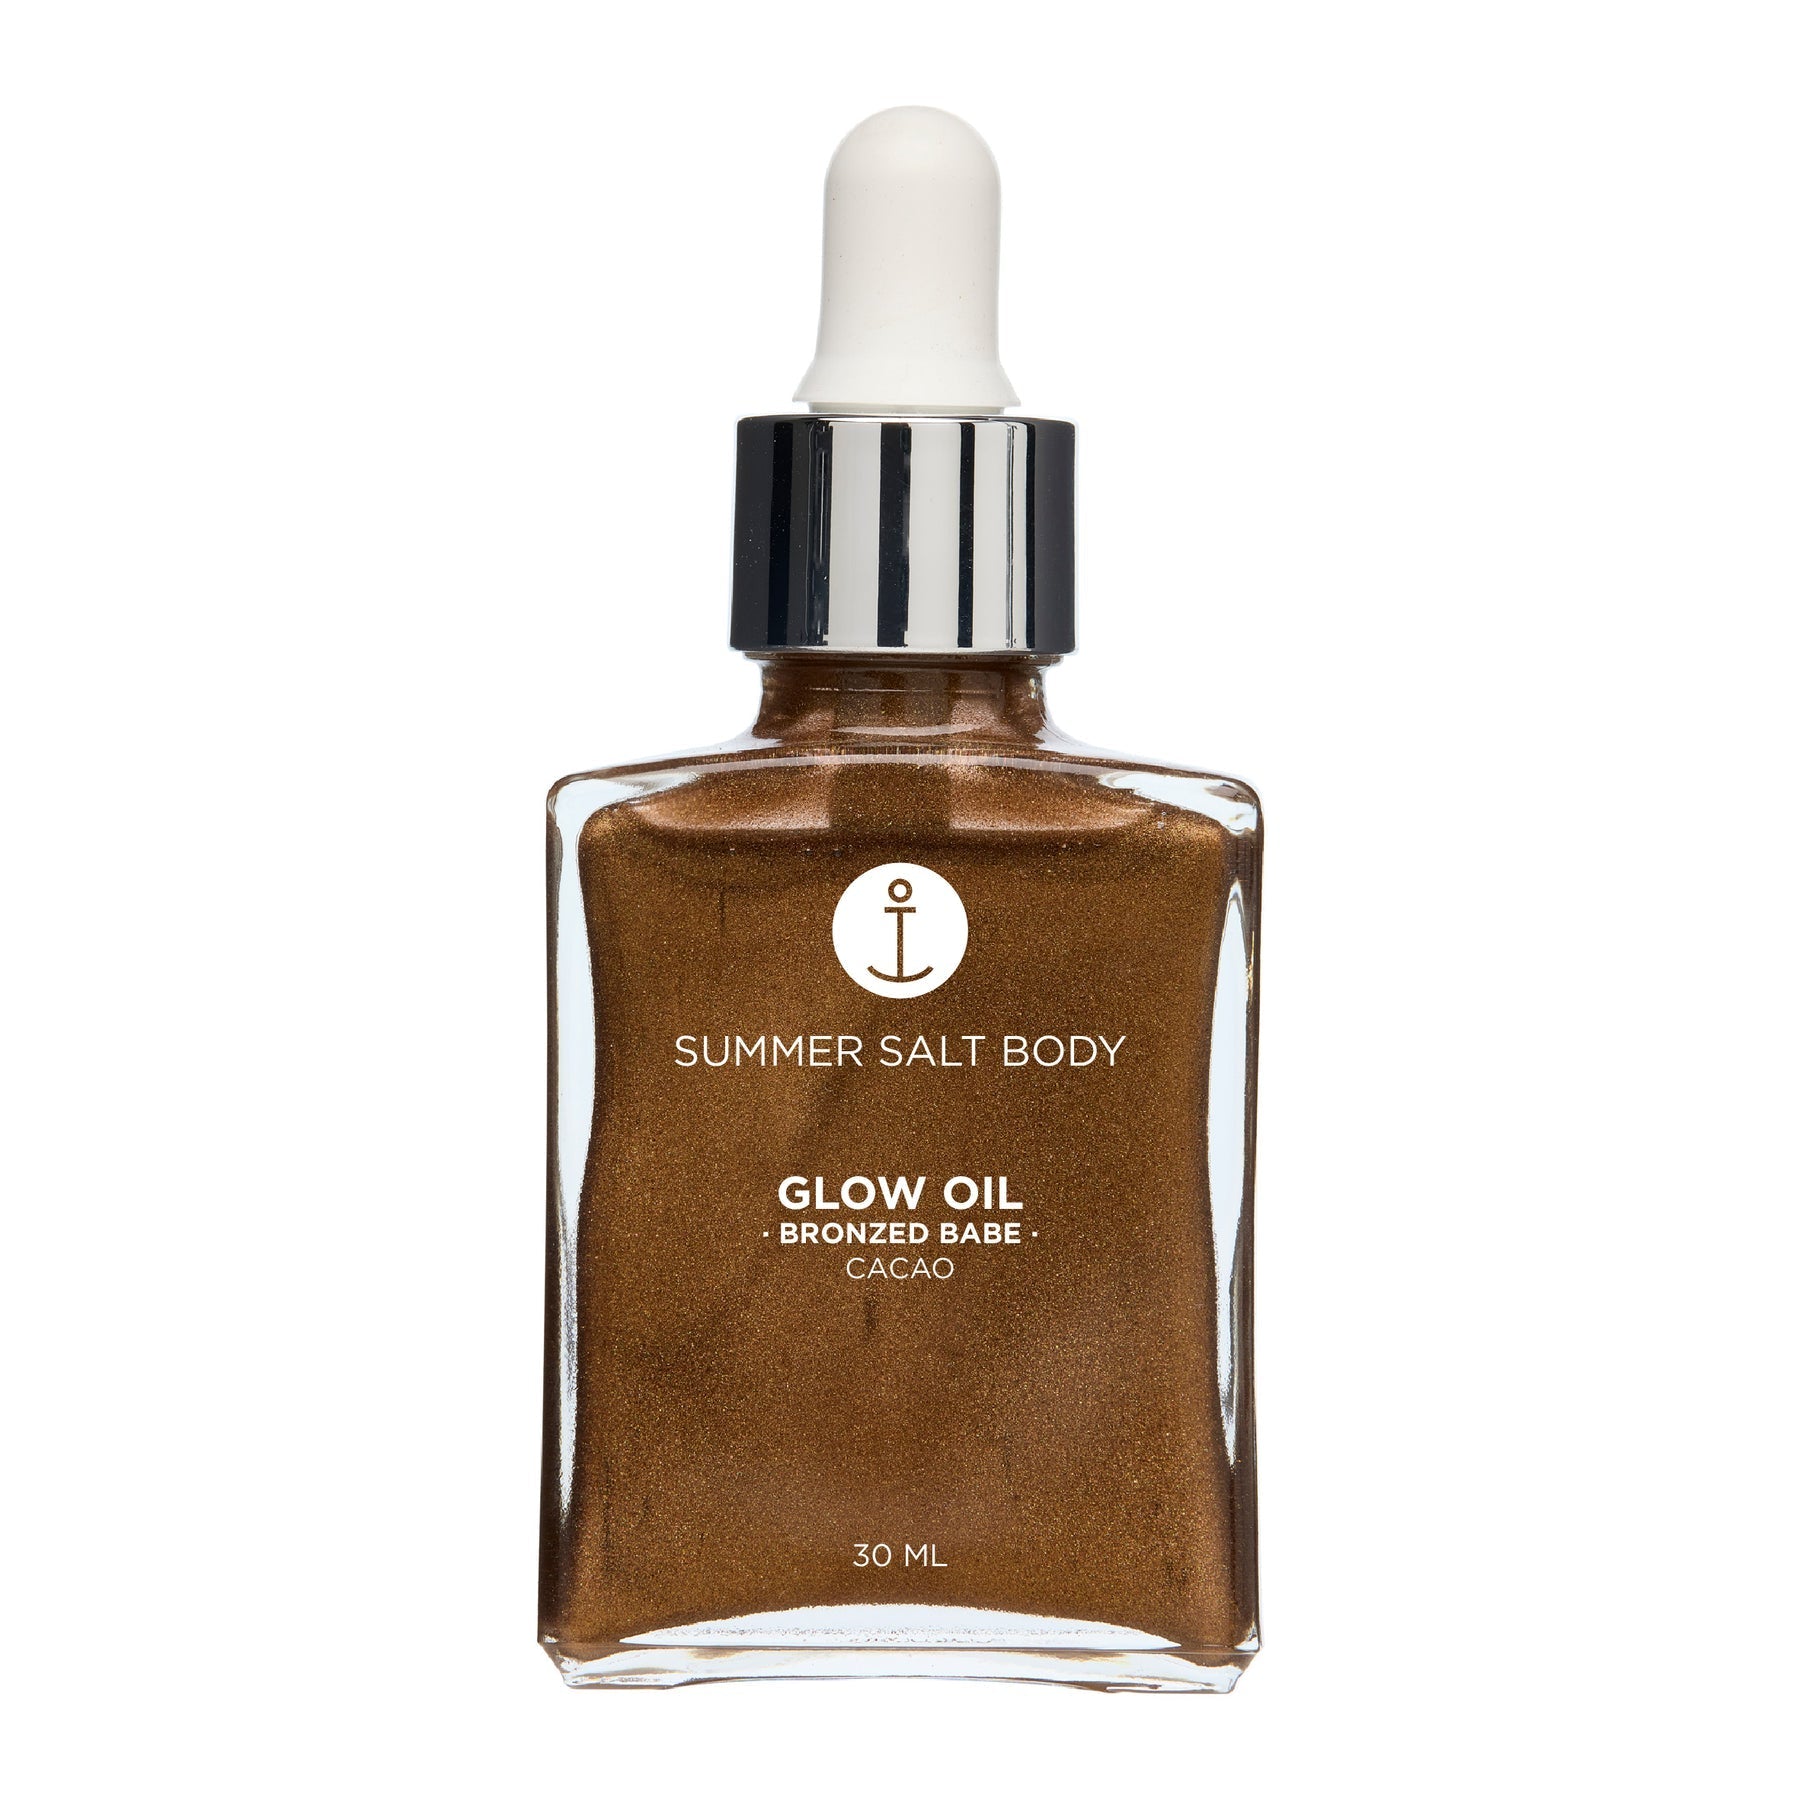 Bronzed Babe - Glow Oil 30ml-Beauty & Well-Being-Summer Salt Body-The Bay Room